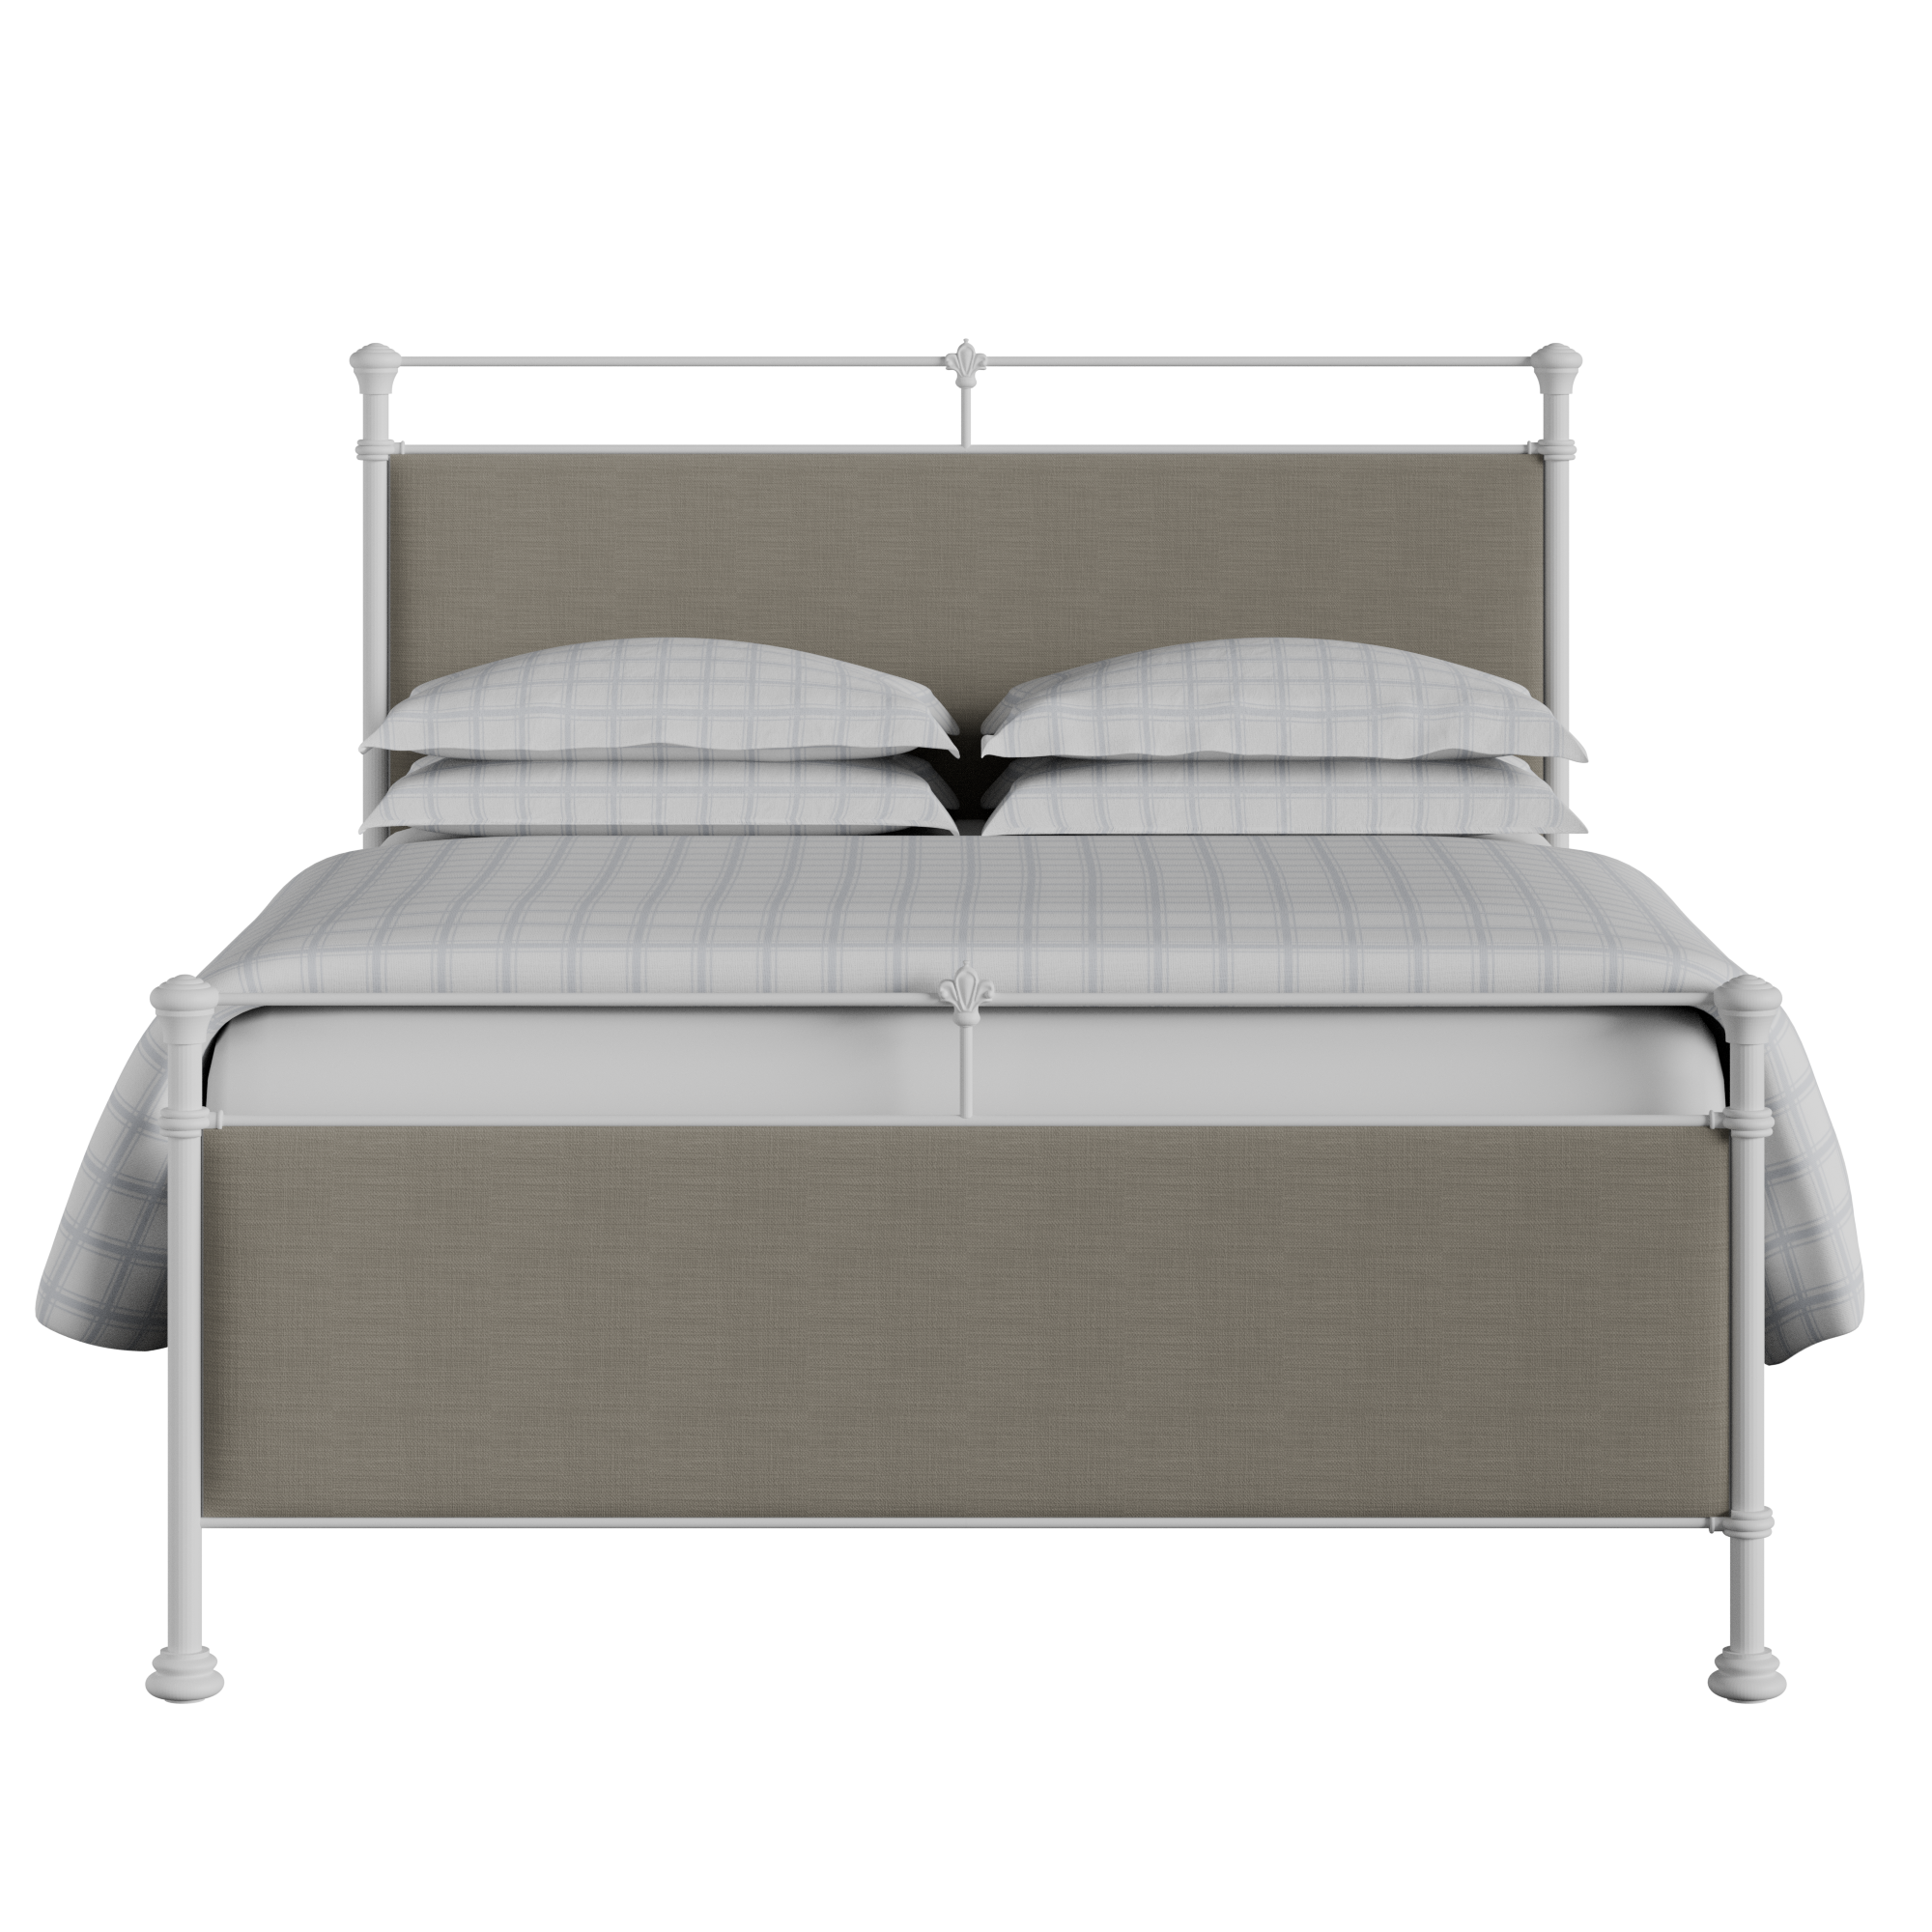 Nancy iron/metal upholstered bed in white with grey fabric